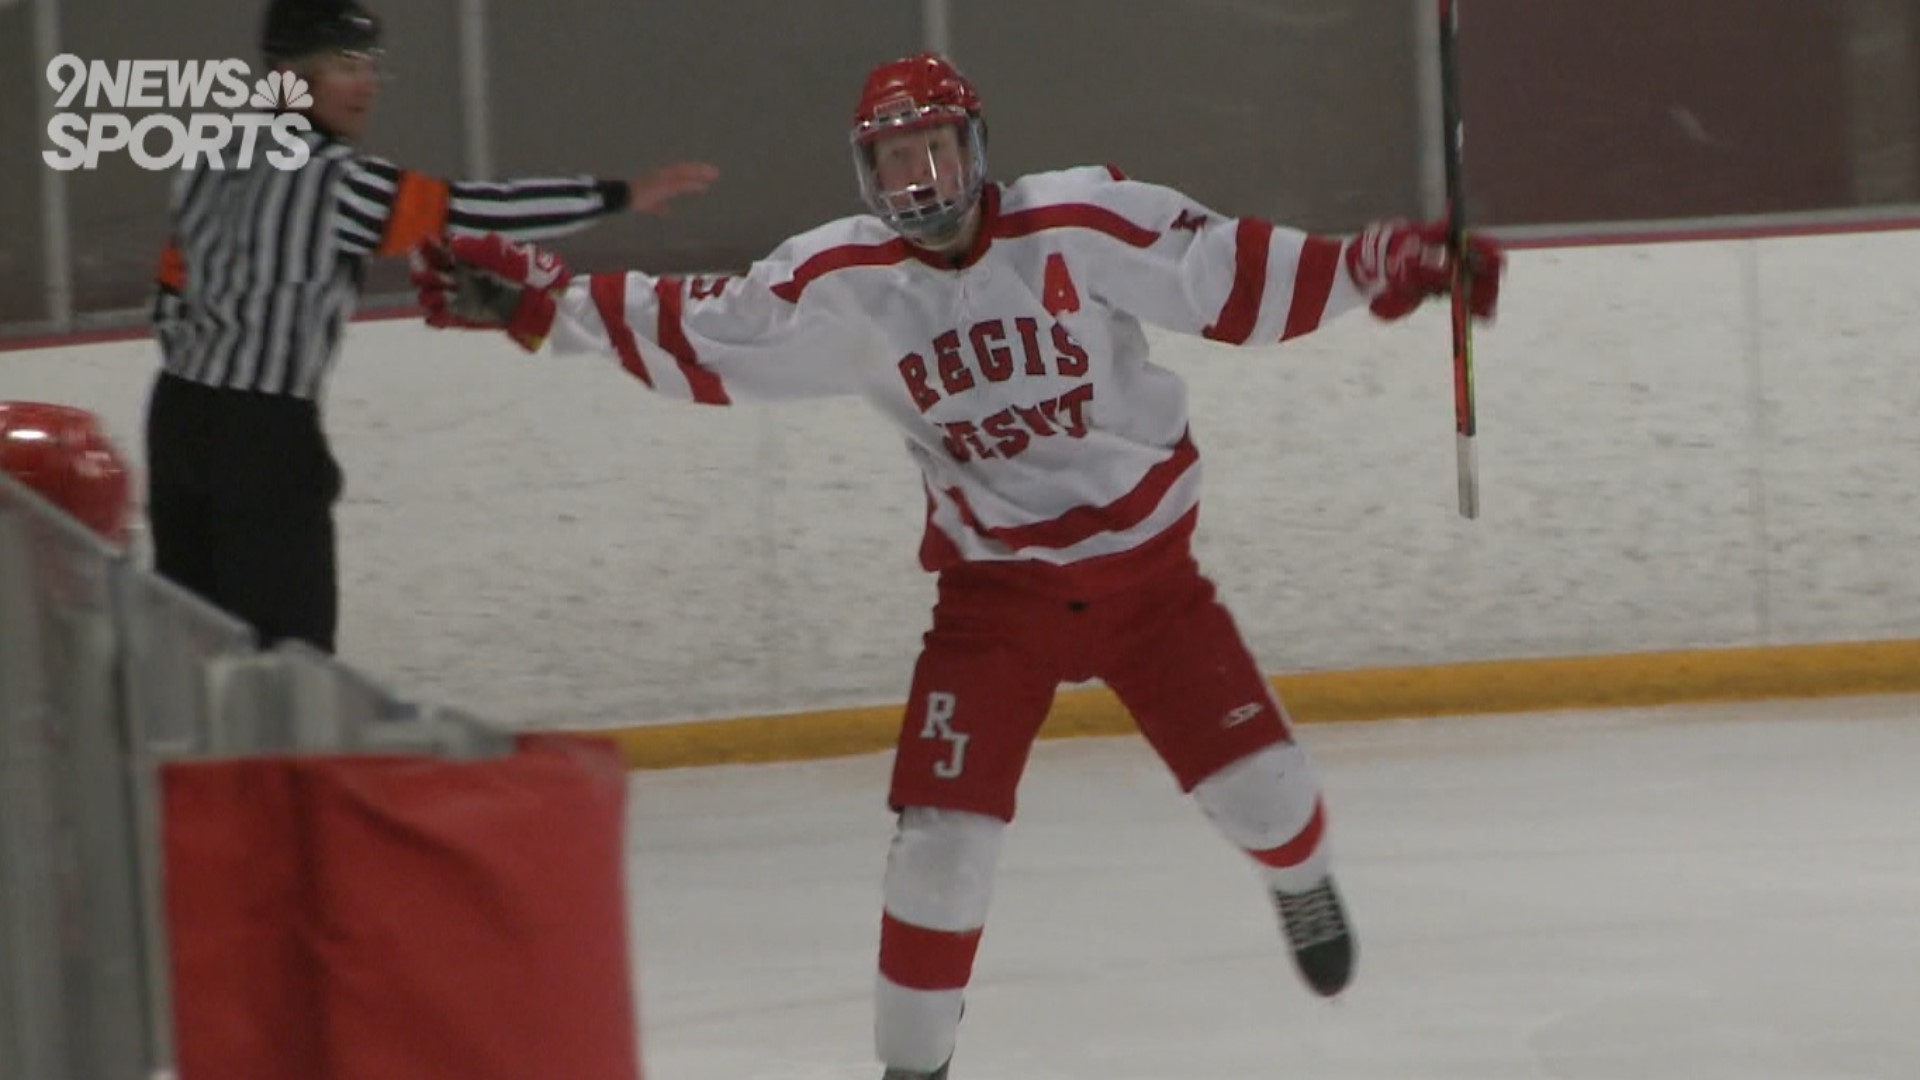 Check out the top plays from winter sports this week, then vote for your favorite!